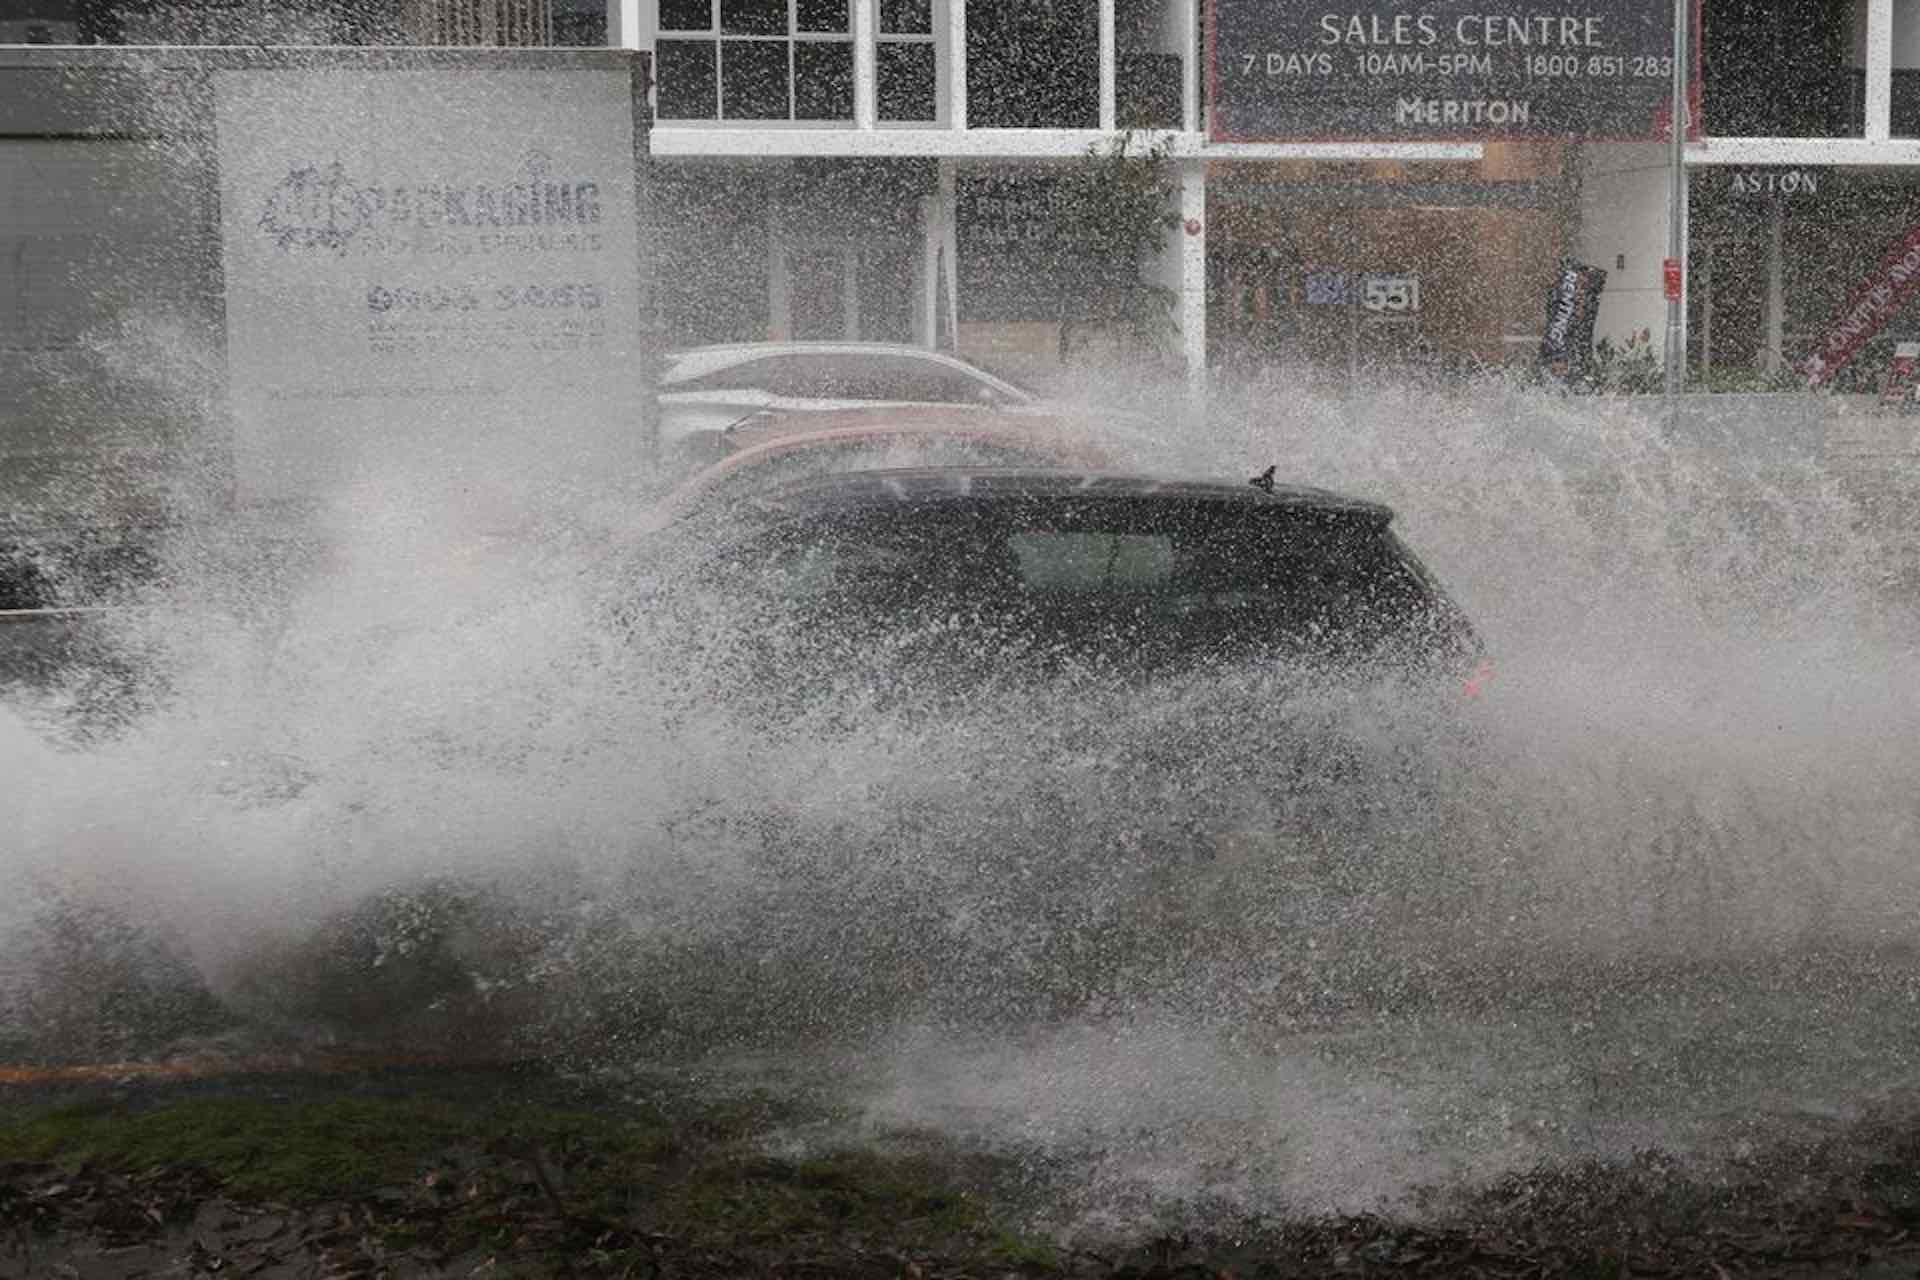 More floods in Australia as Sydney records wettest year since 1858